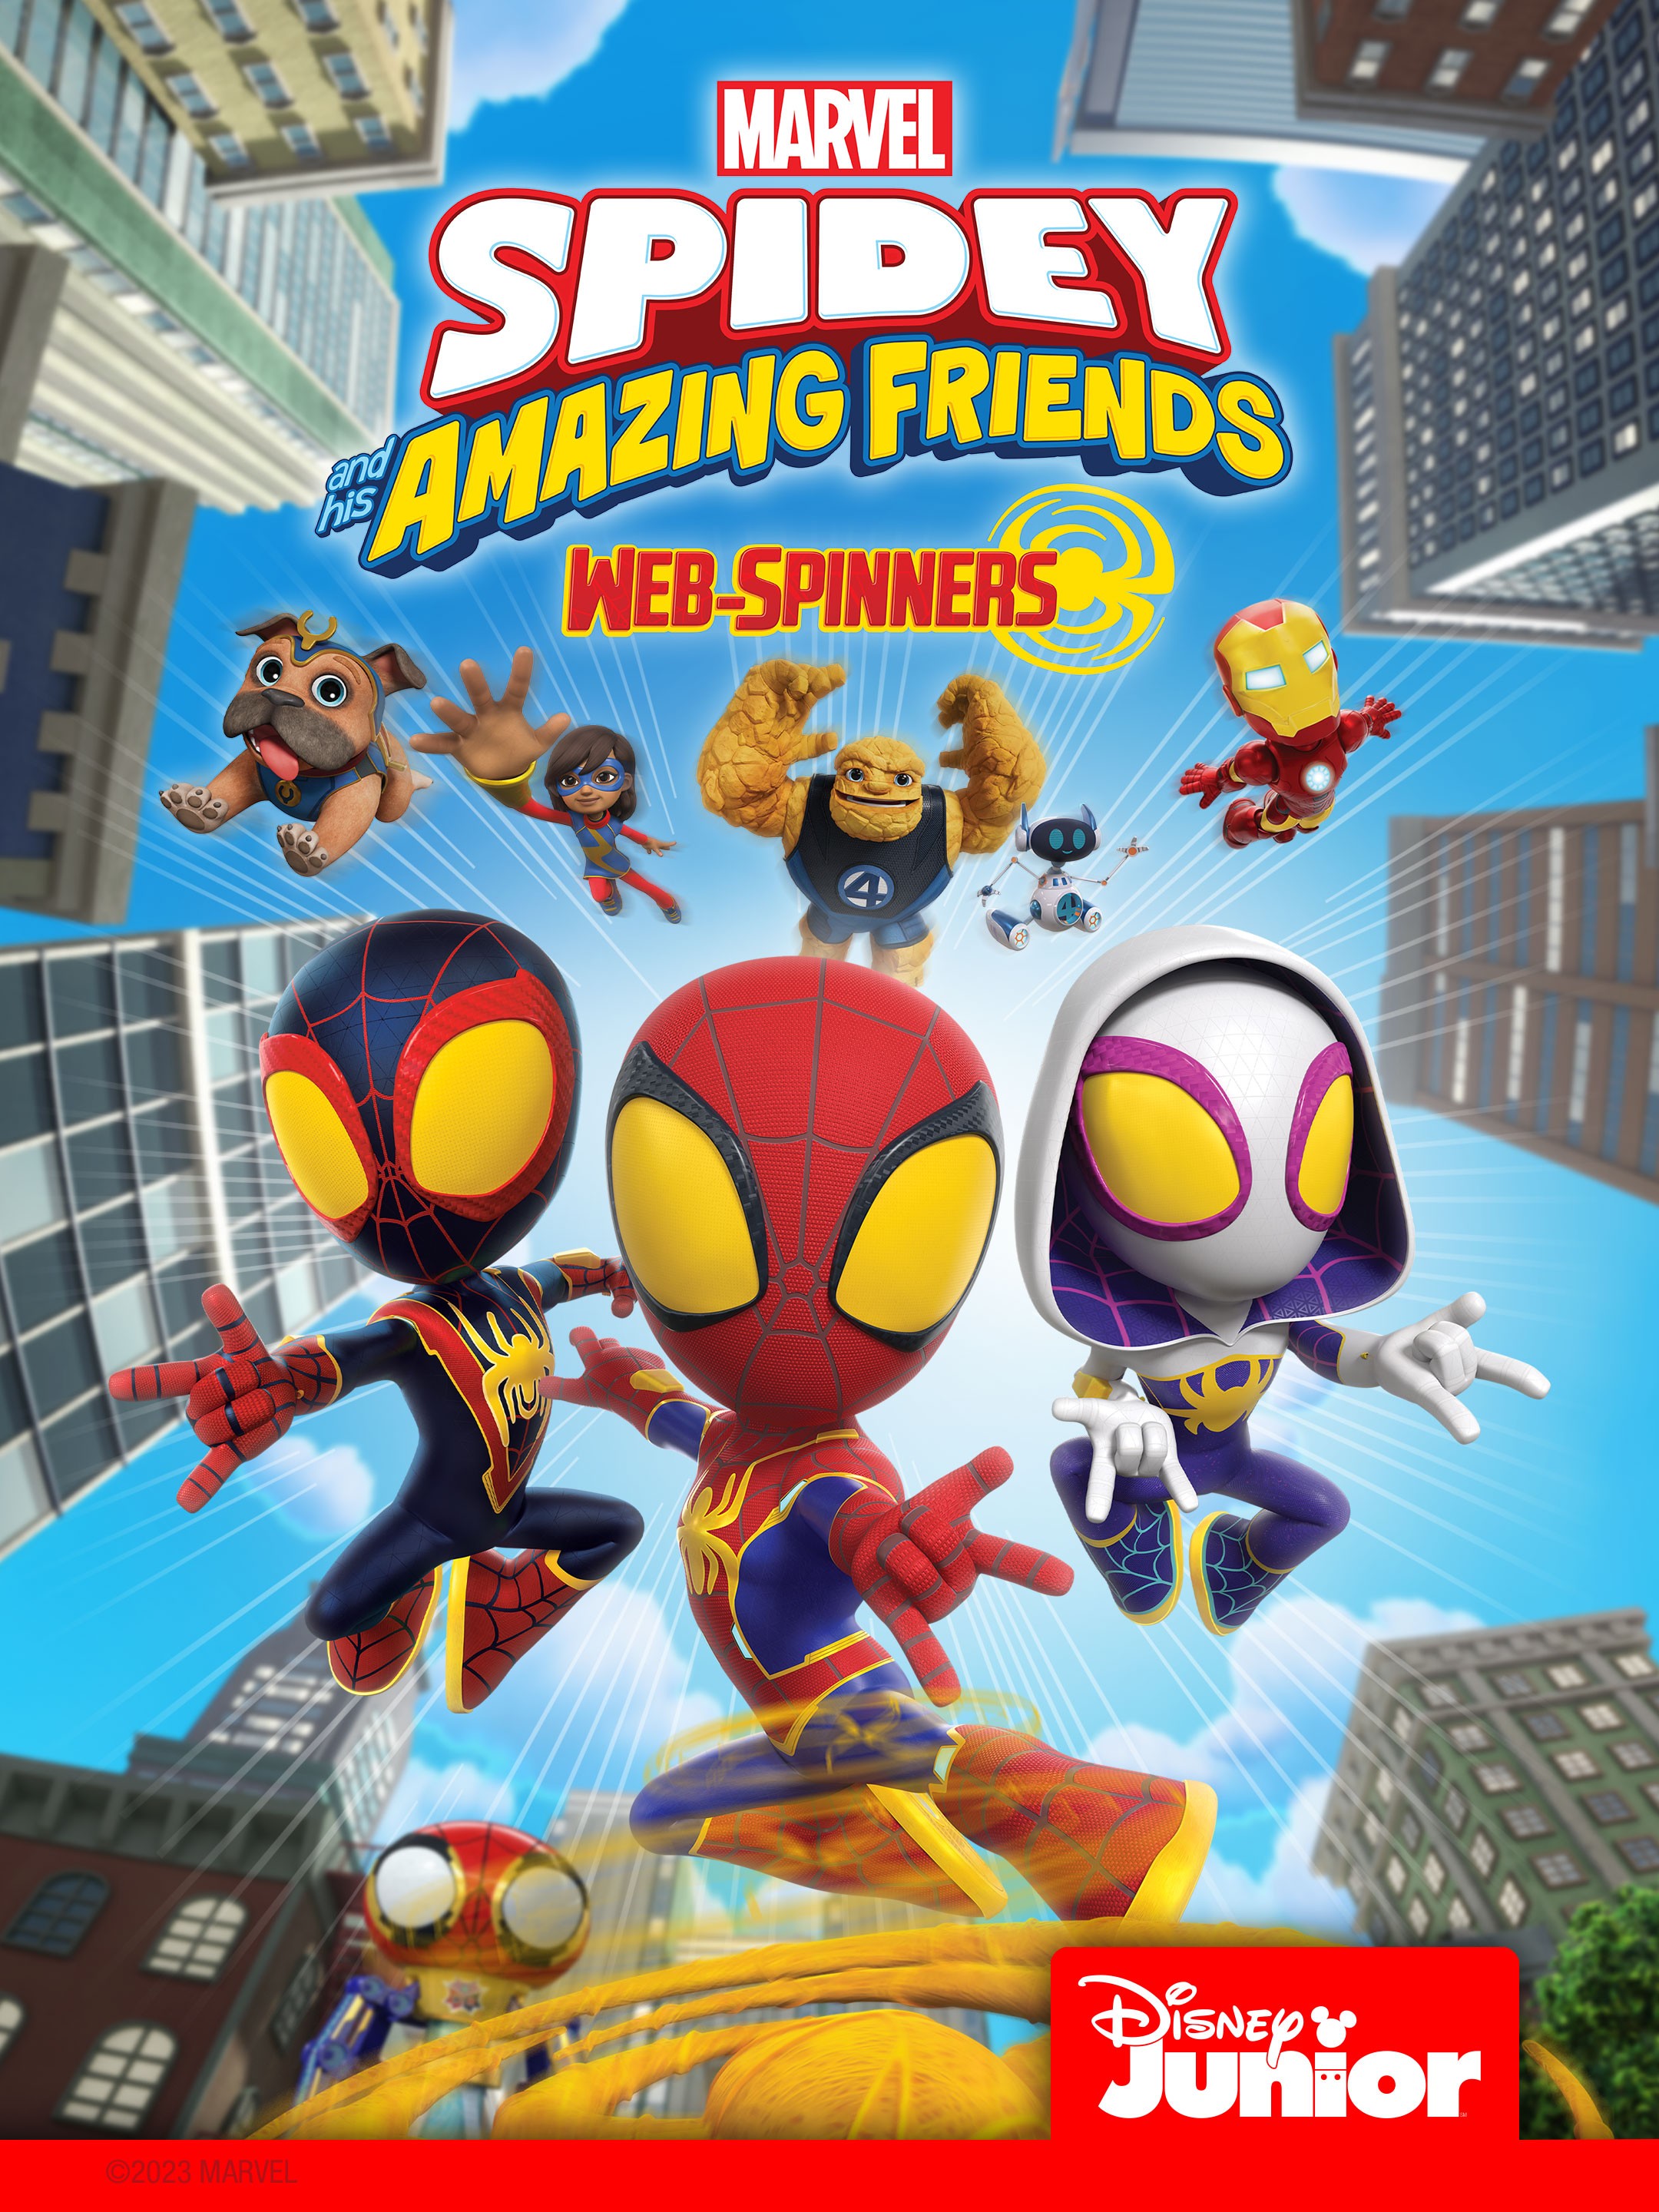 Marvel's Spidey and His Amazing Friends animated series debuting 2021 - CNET